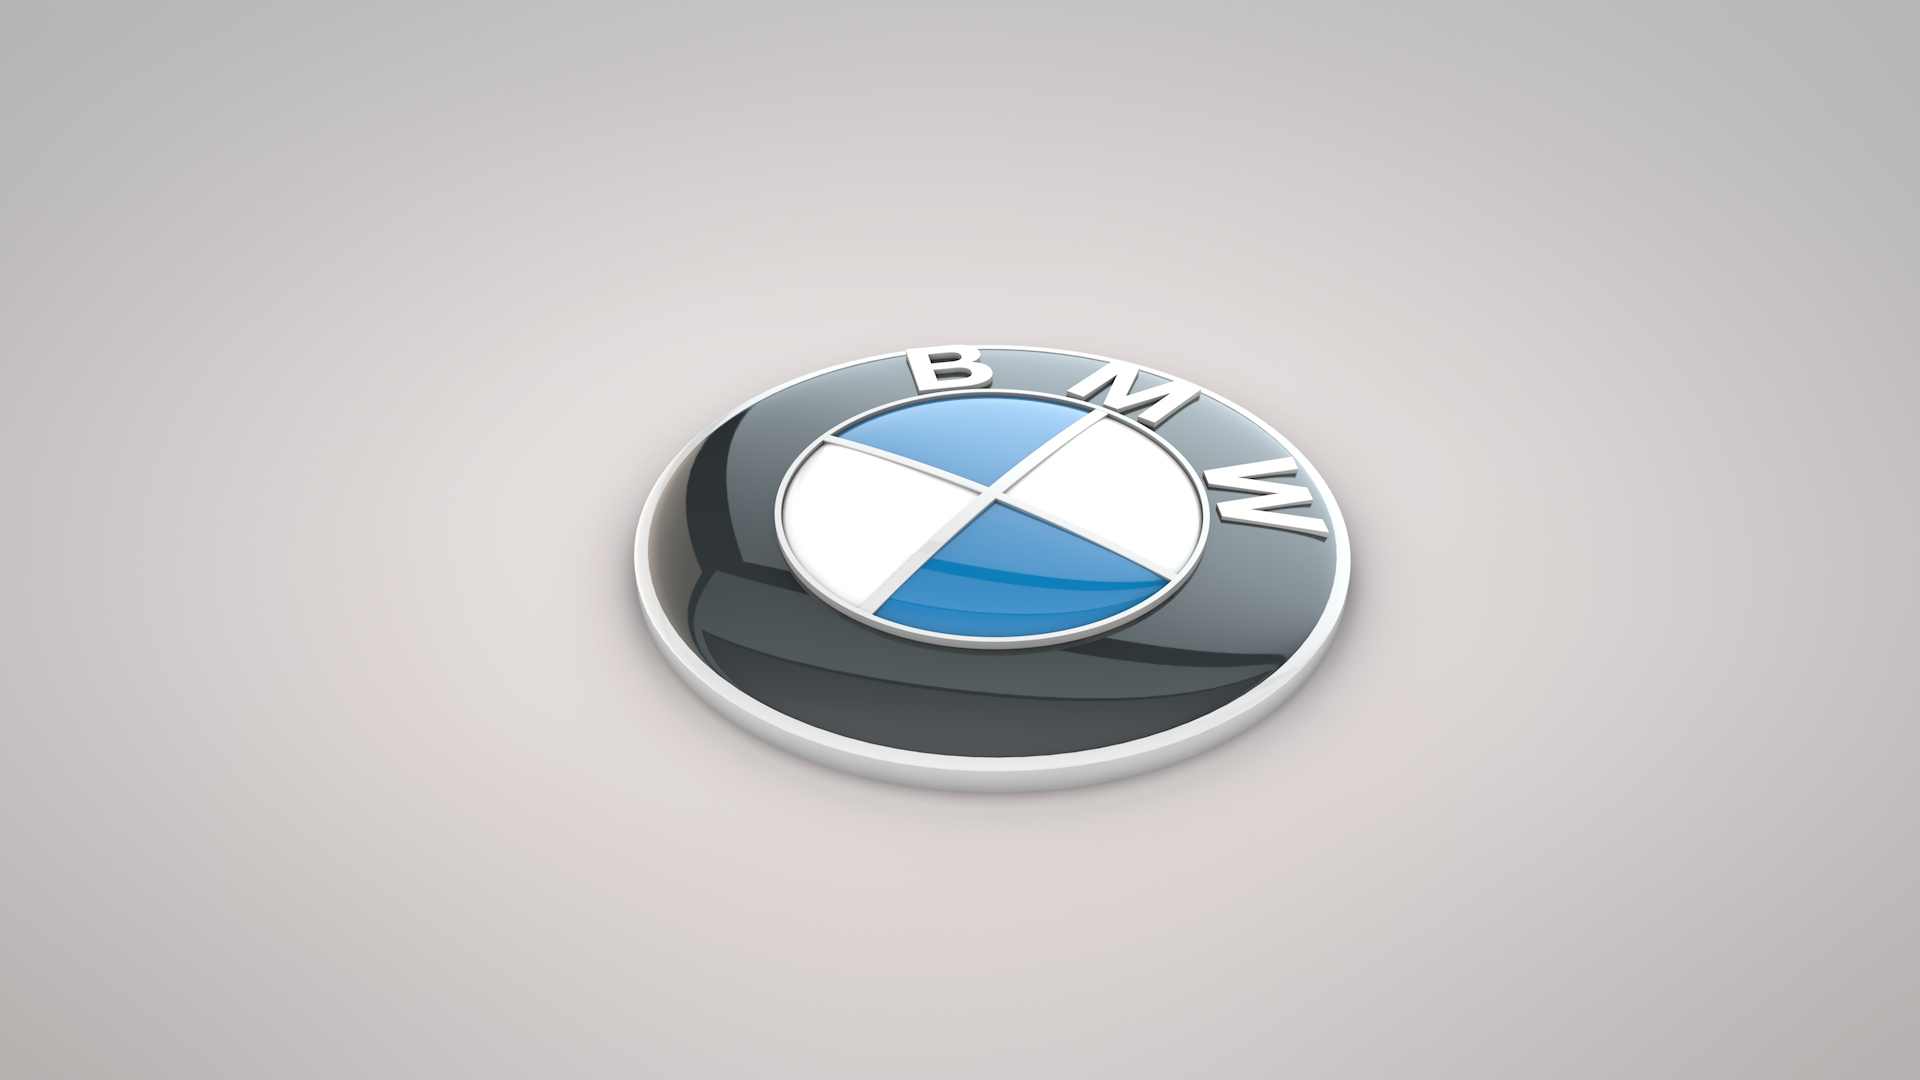 Download wallpapers BMW blue logo, 4k, blue neon lights, creative, blue  abstract background, BMW logo, cars brands, BMW for desktop with resolution  3840x2400. High Quality HD pictures wallpapers